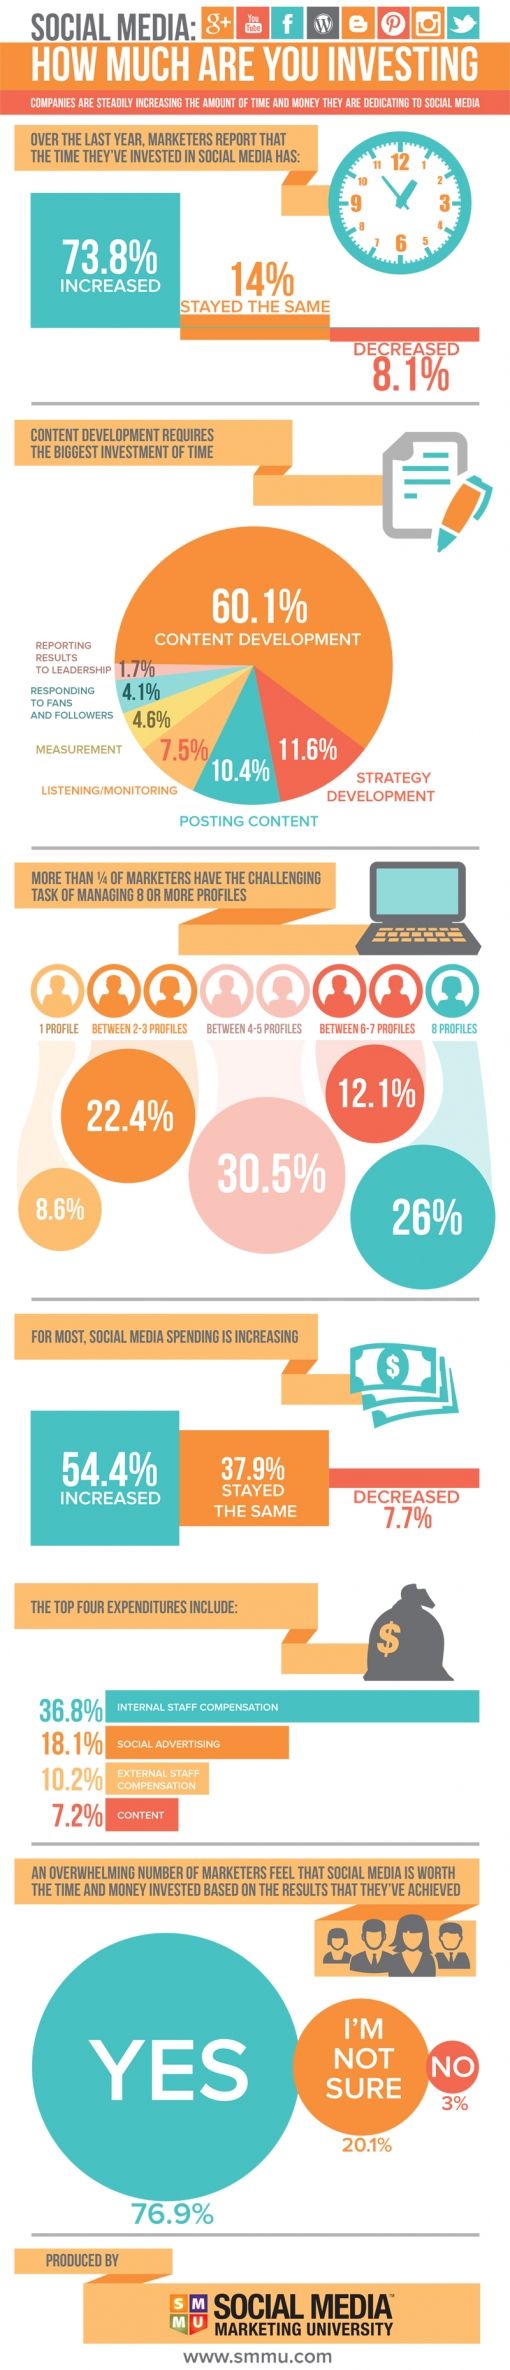 Social_media_-_How_much_are_you_investing